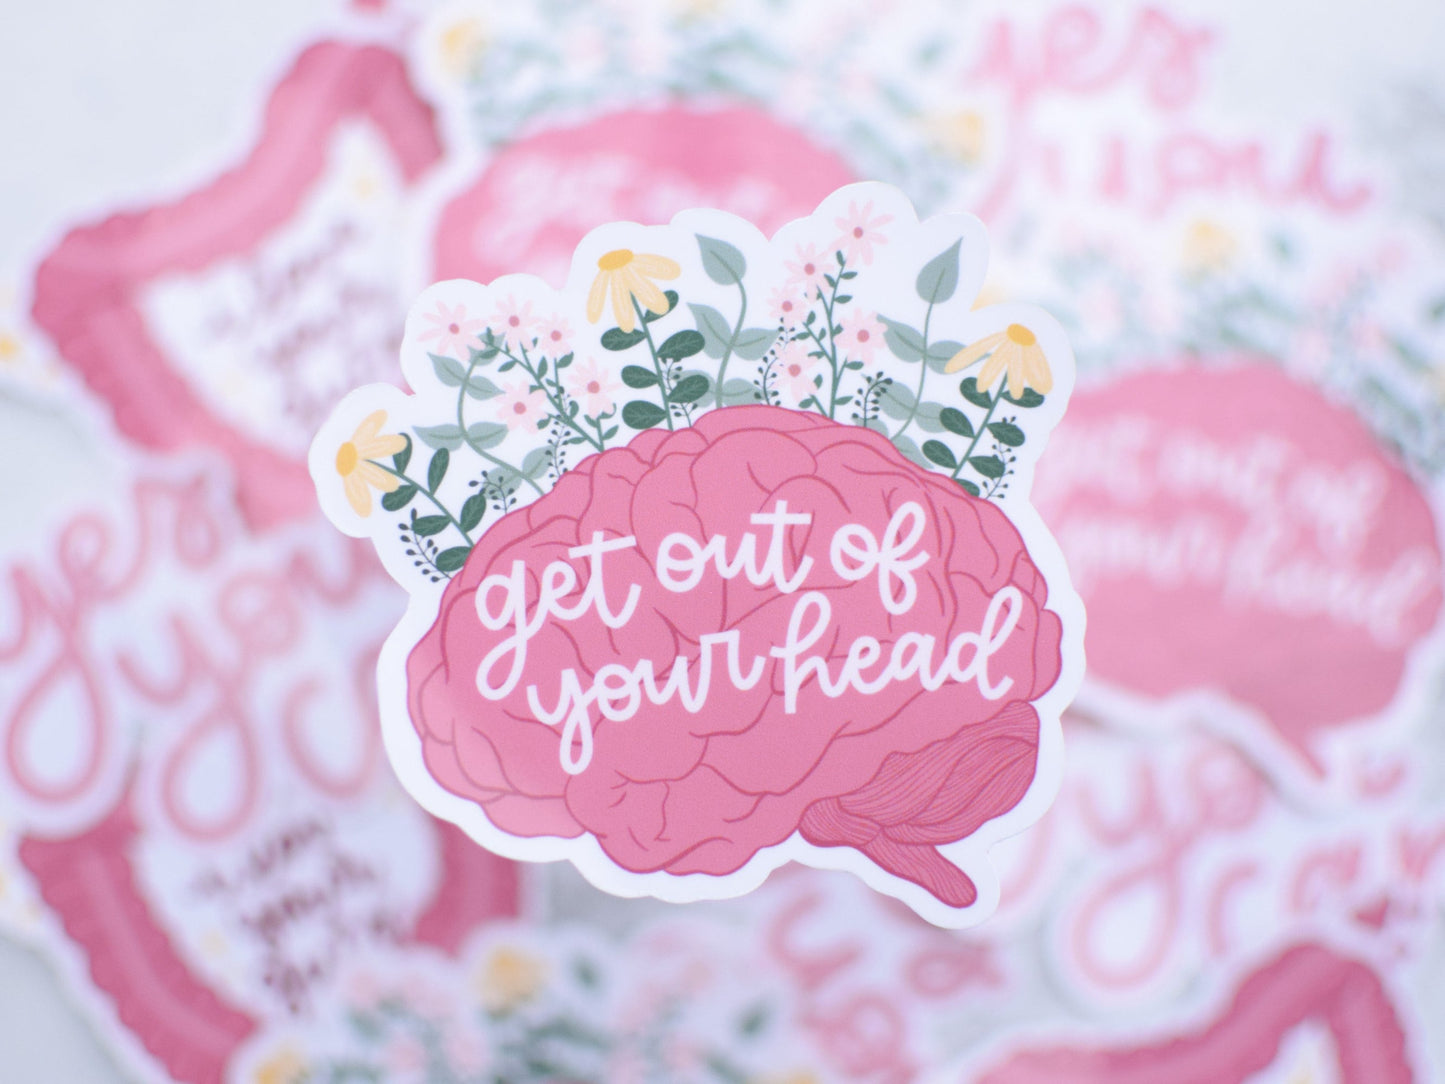 Get Out Of Your Head Sticker